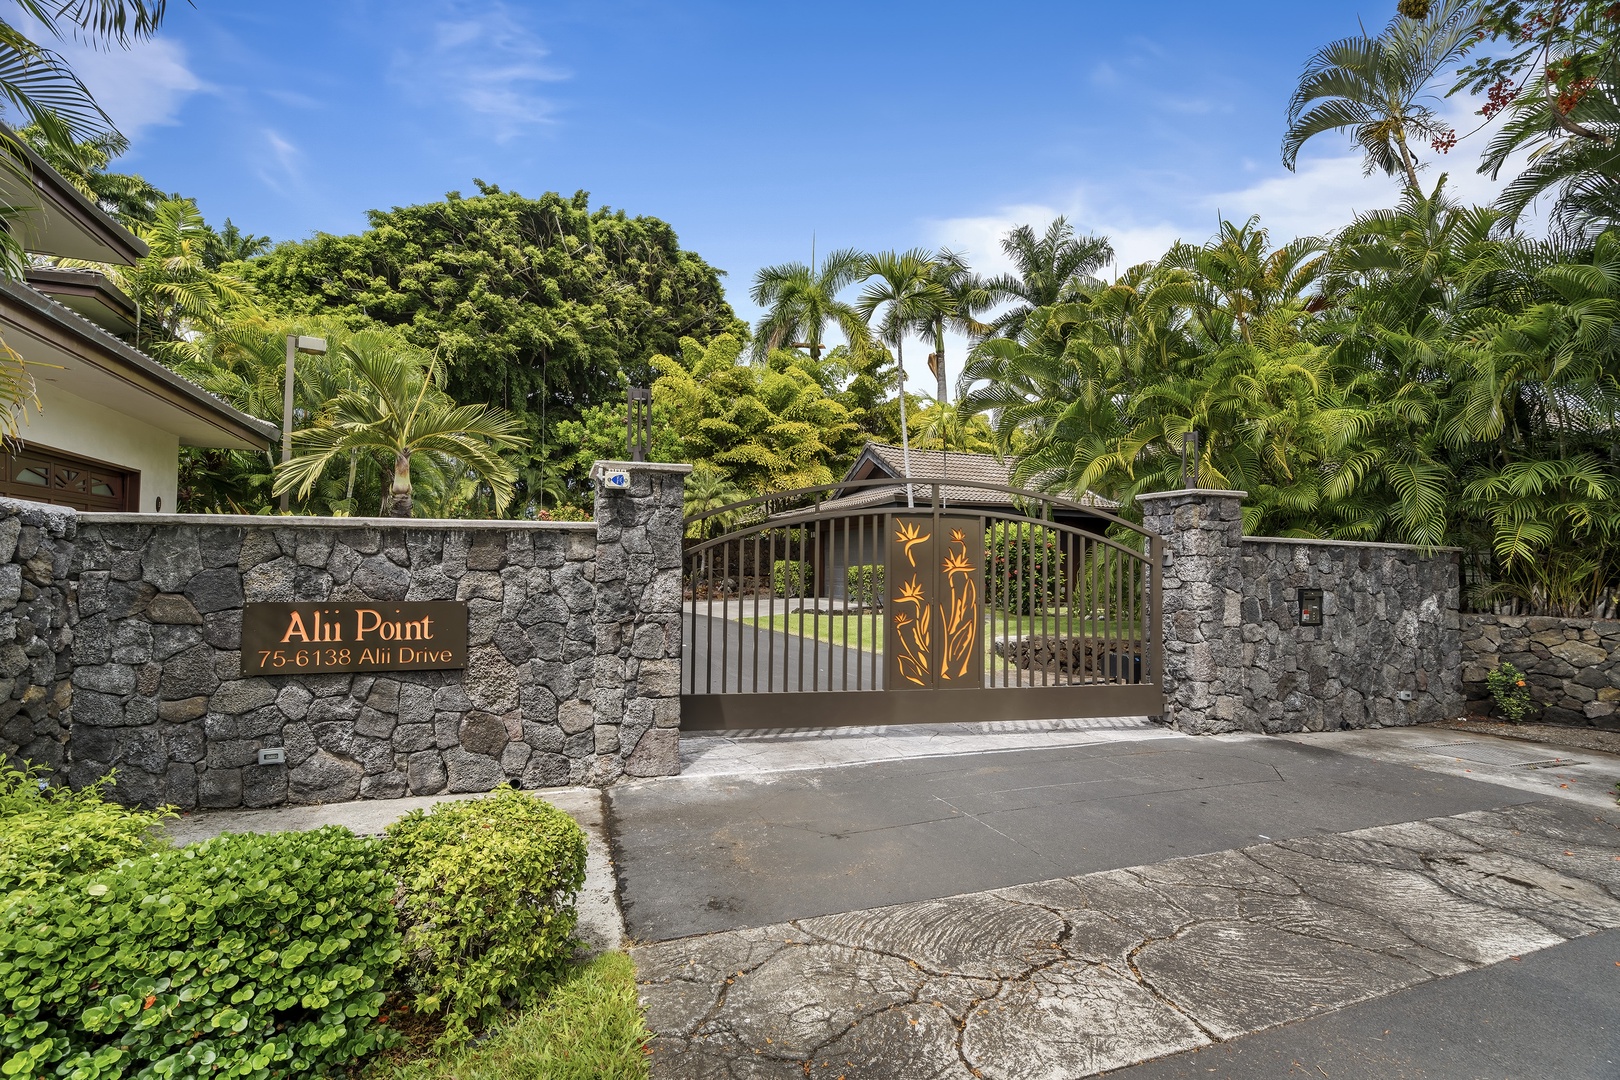 Kailua Kona Vacation Rentals, Ali'i Point #12 - Gated entry of the Alii Point Complex